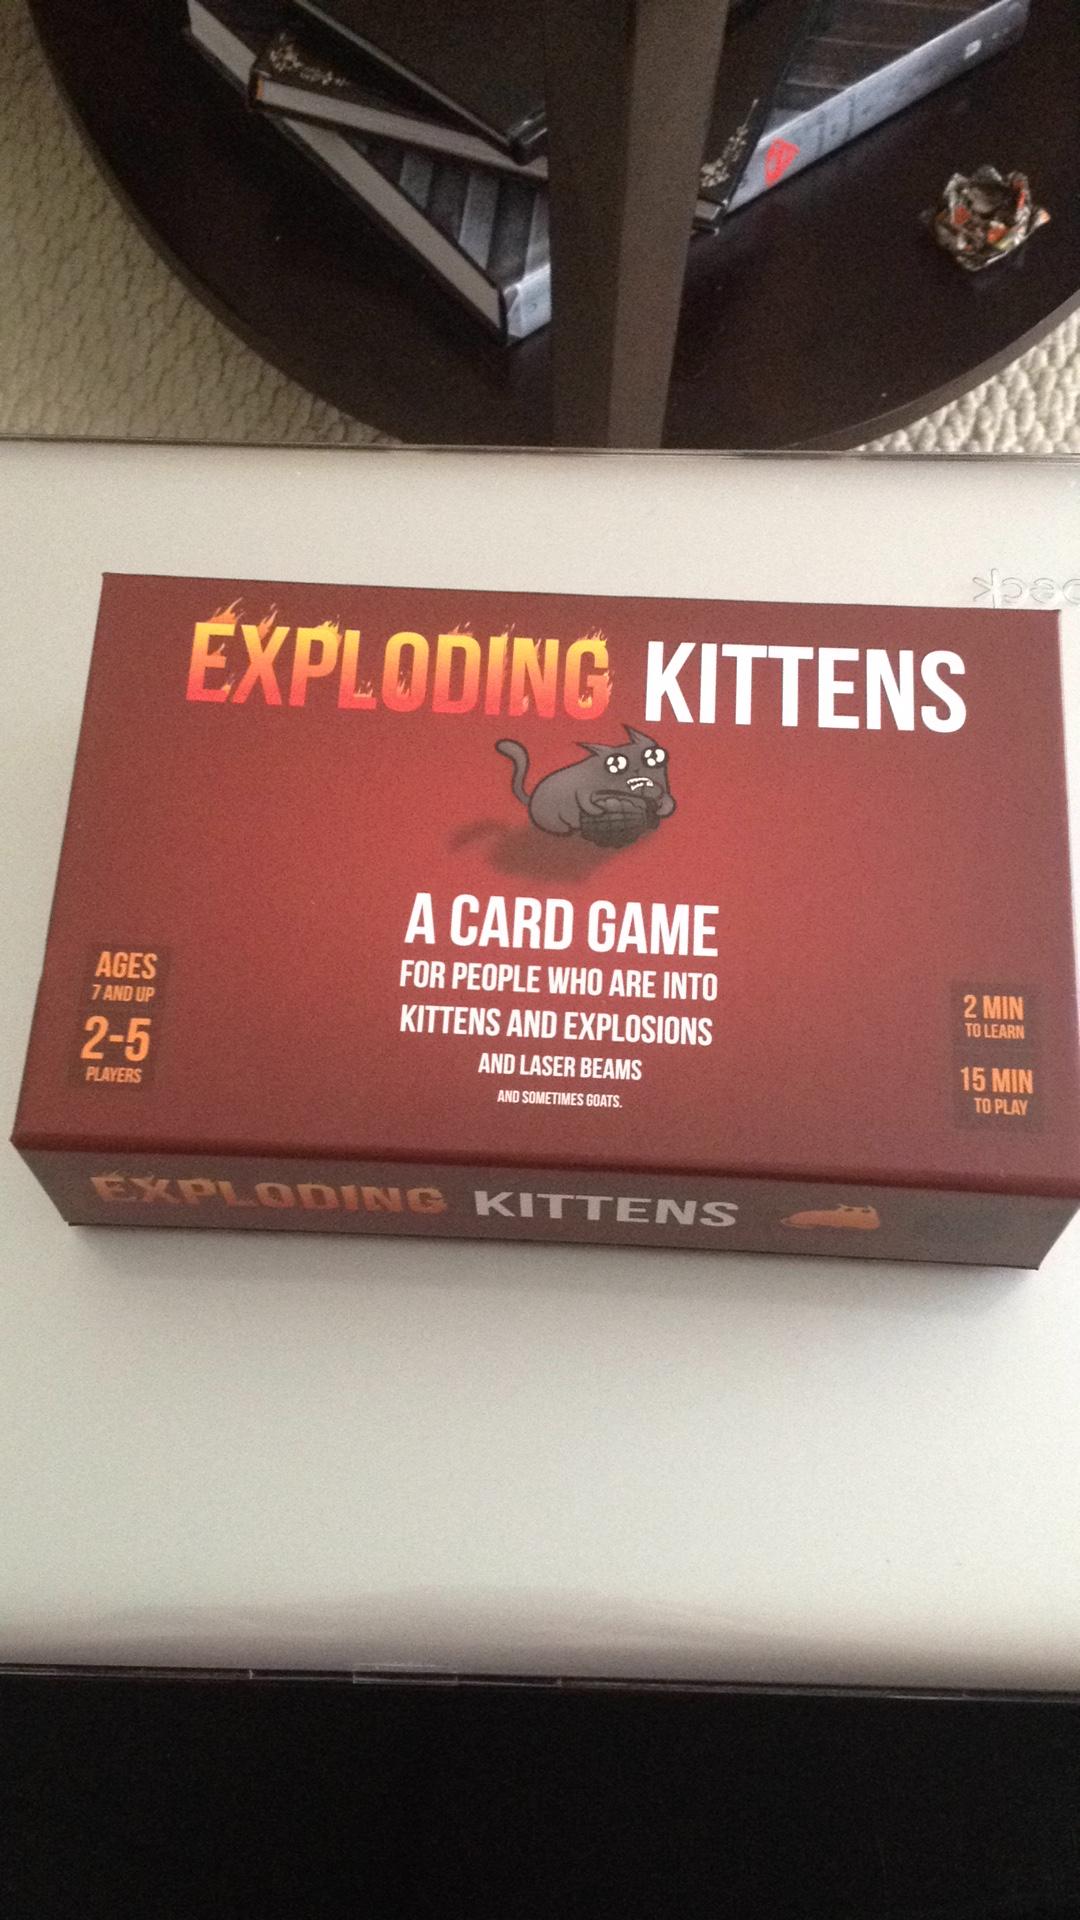 Exploding Kittens - ssa Exploding Kittens A Card Game Ages 7 And Up For People Who Are Into Kittens And Explosions And Laser Beams 25 2 Min To Learn Players 15 Min And Sometimes Goats. To Play Exploding Kittens